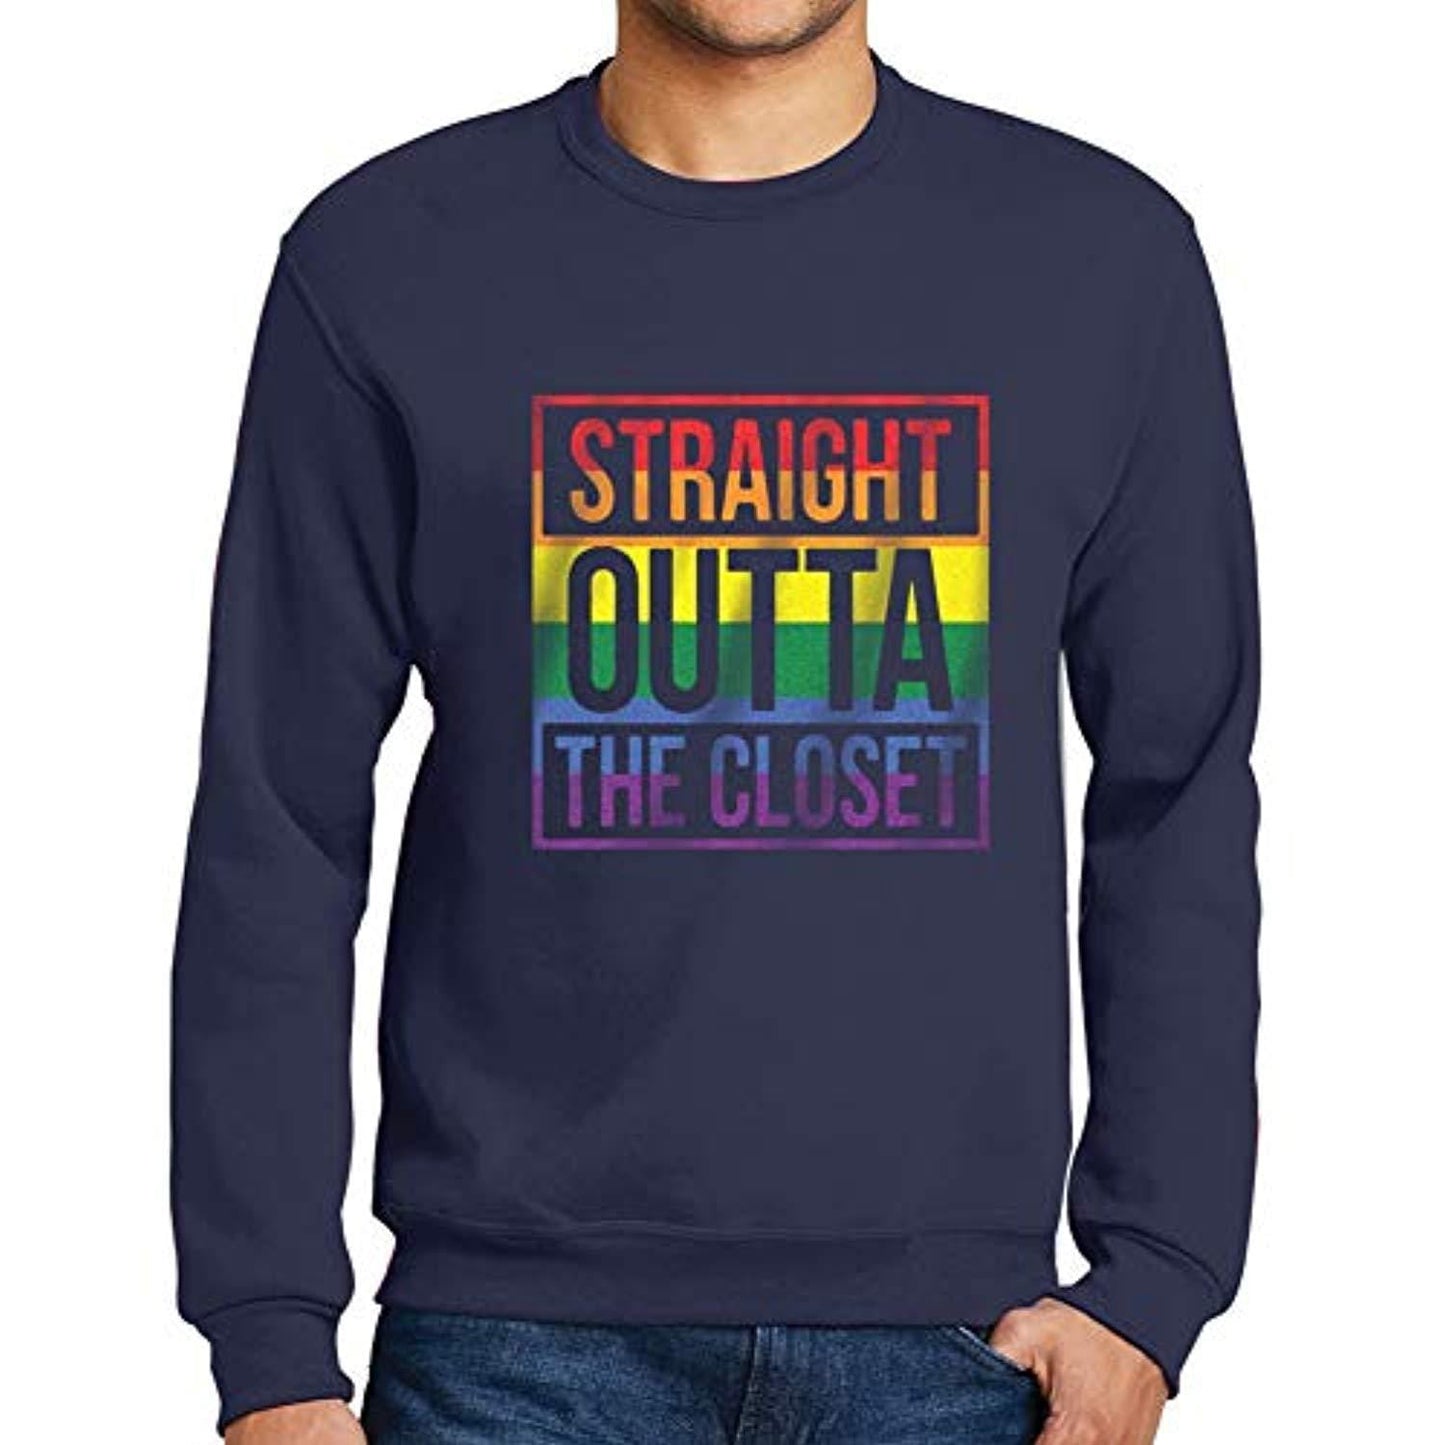 Ultrabasic Men's Printed Graphic Sweatshirt LGBT Straight Outta The Closet French Navy